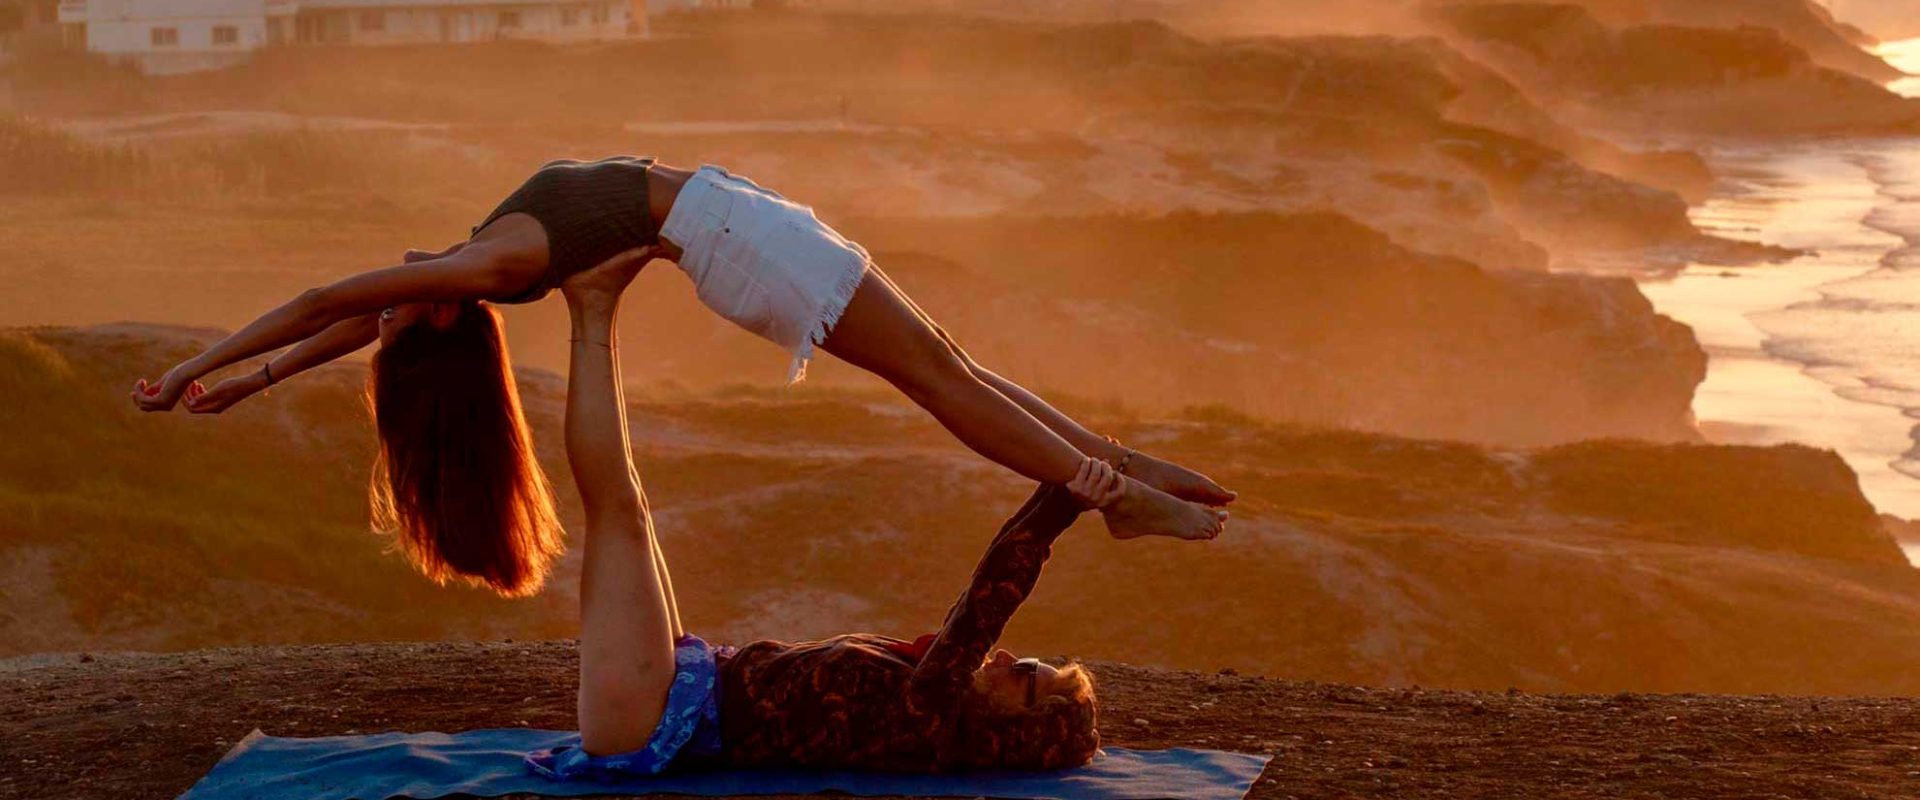 yoga_outdoor_peniche_portugal_tablet